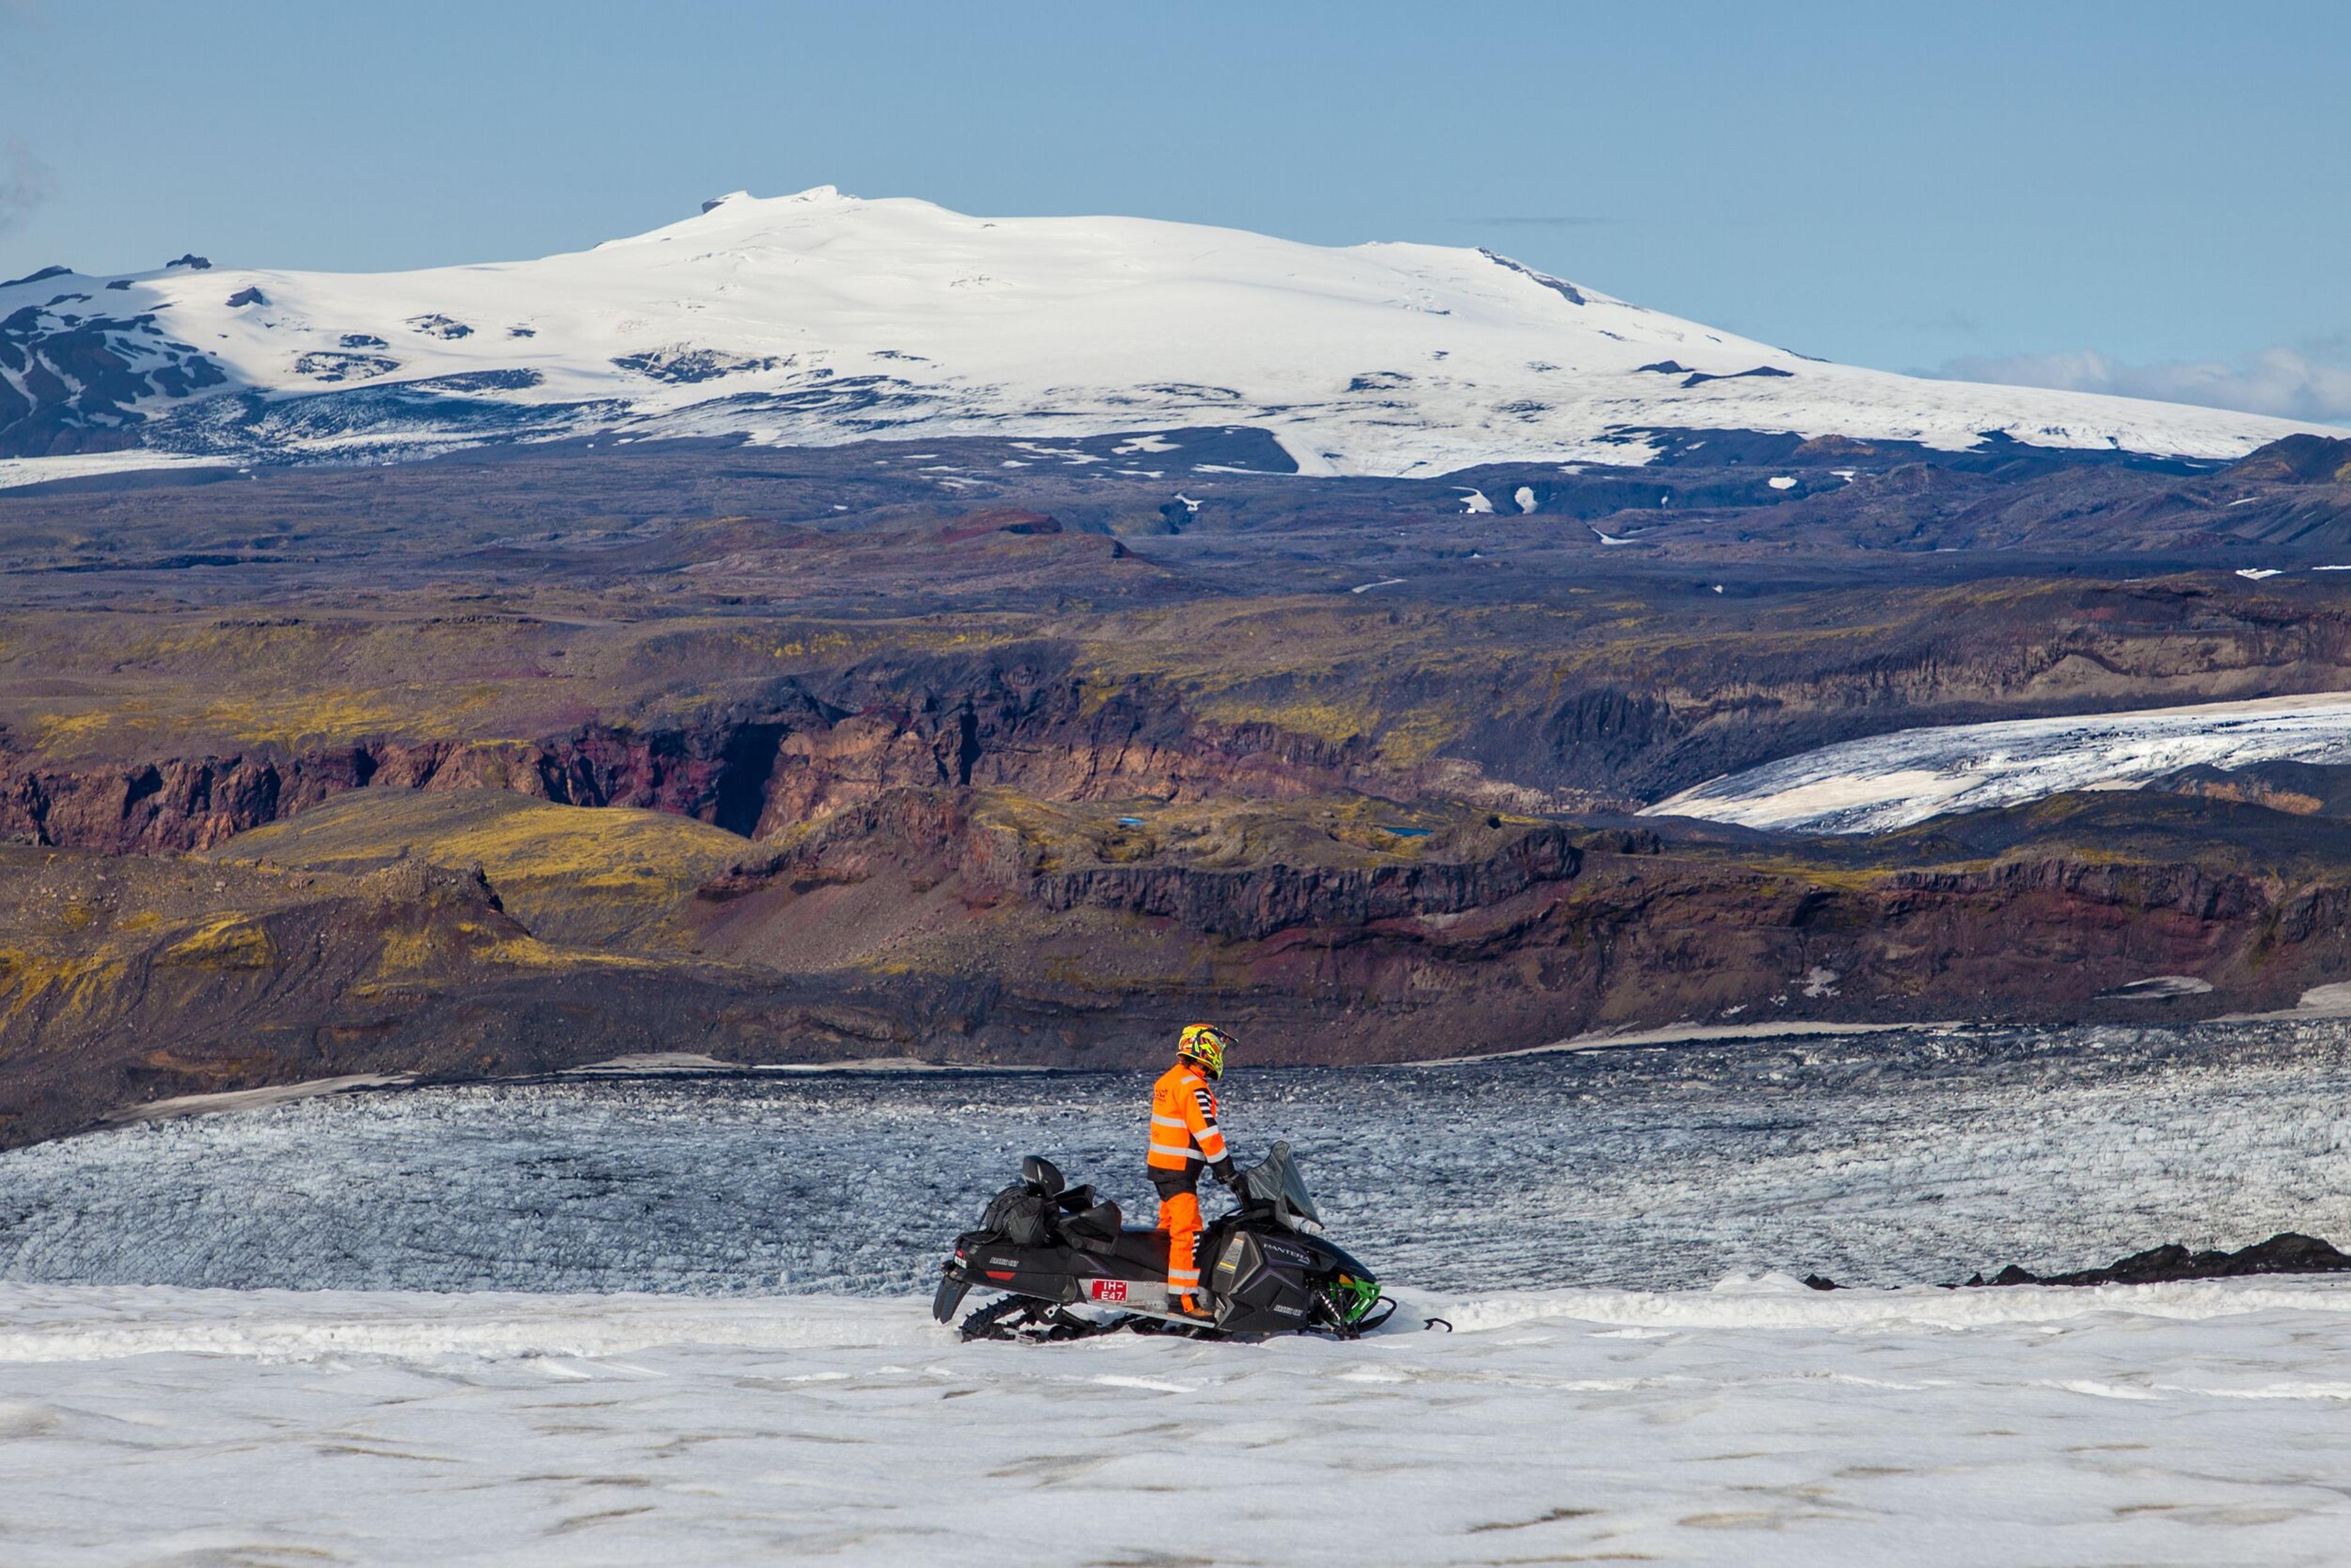 A person in high-visibility gear standing next to a snowmobile on a snowy expanse, with a backdrop of rugged cliffs and a snow-capped mountain under a clear blue sky.